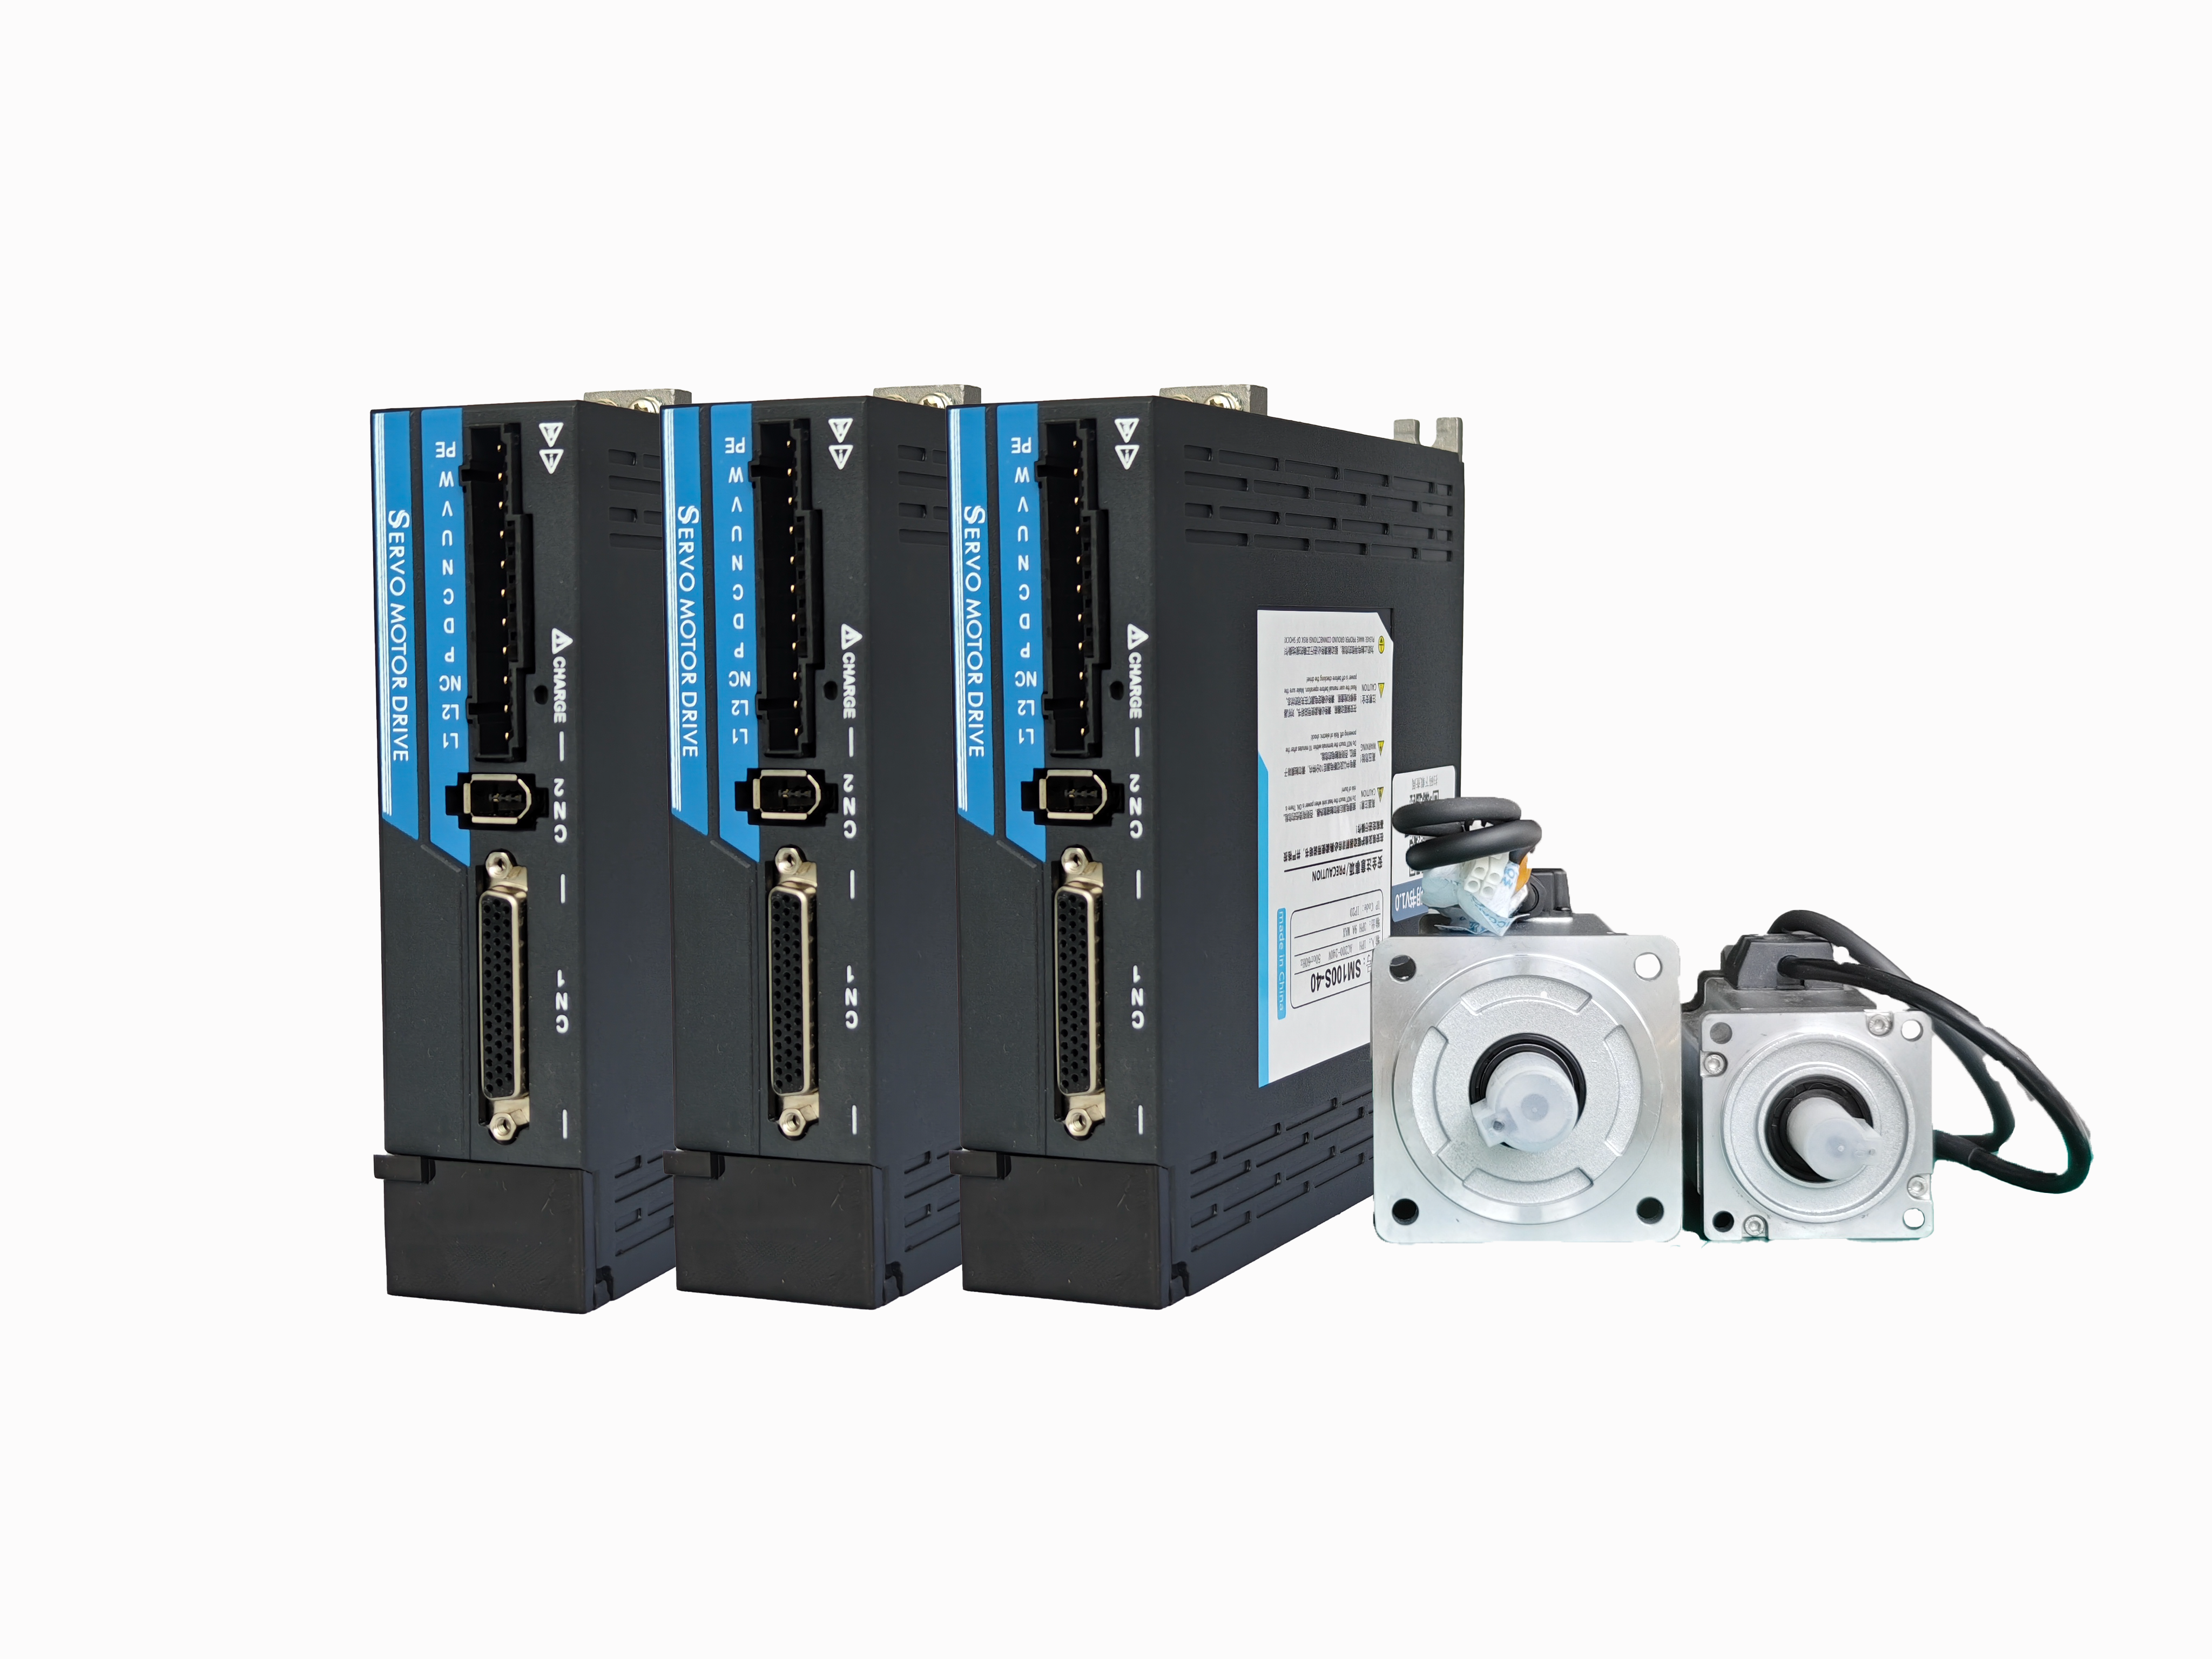 The new H100S series servo motors are launched, leading the new market trend with excellent quality and competitiveness.